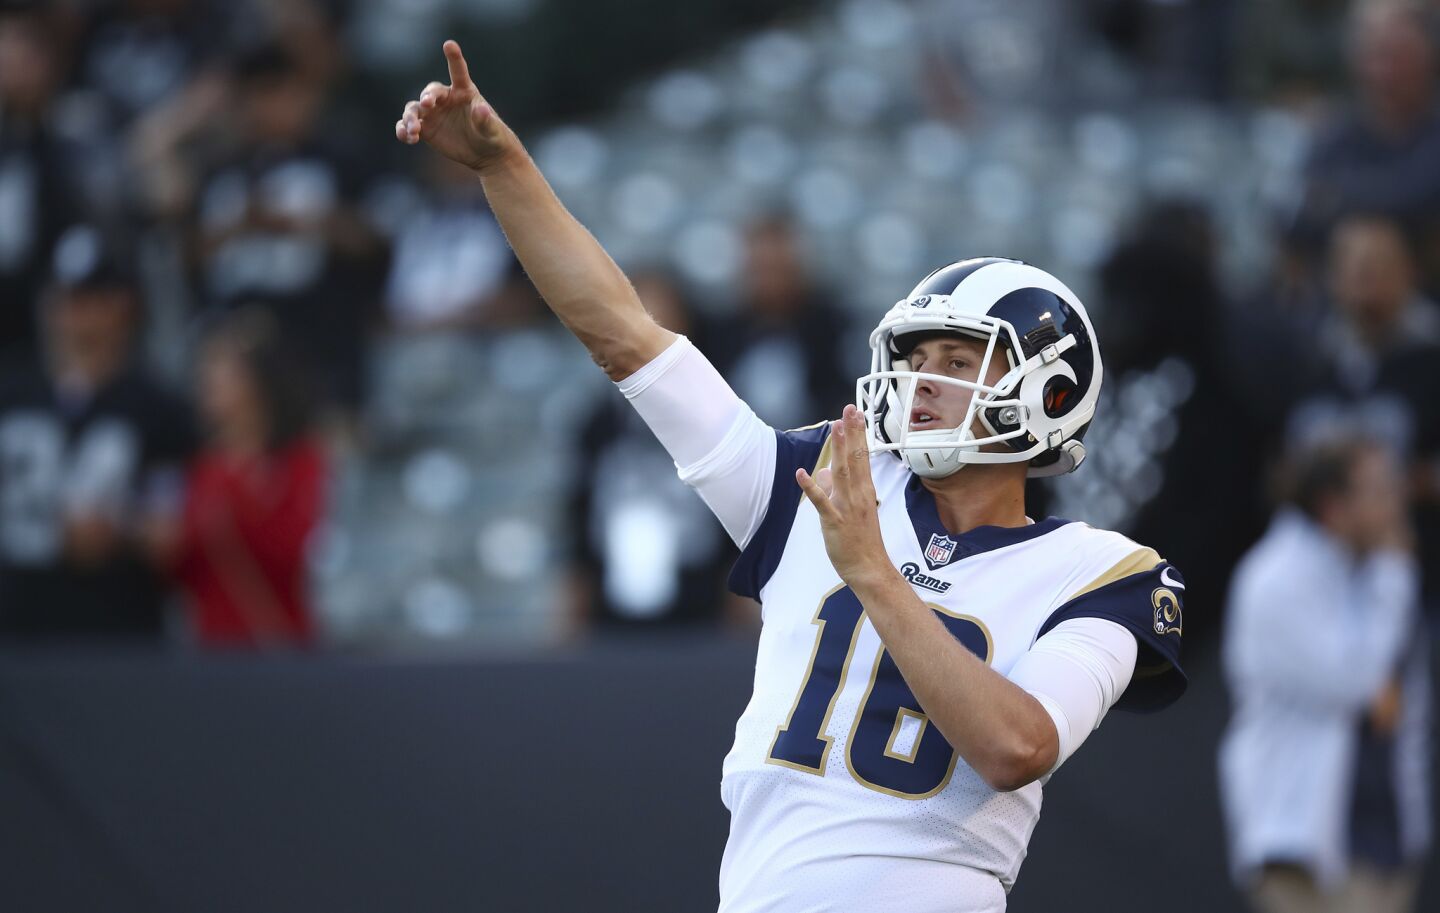 Los Angeles Rams quarterback Jared Goff warms up before an NFL football game against the Oakland Raiders in Oakland, Calif., Monday, Sept. 10, 2018. (AP Photo/Ben Margot)